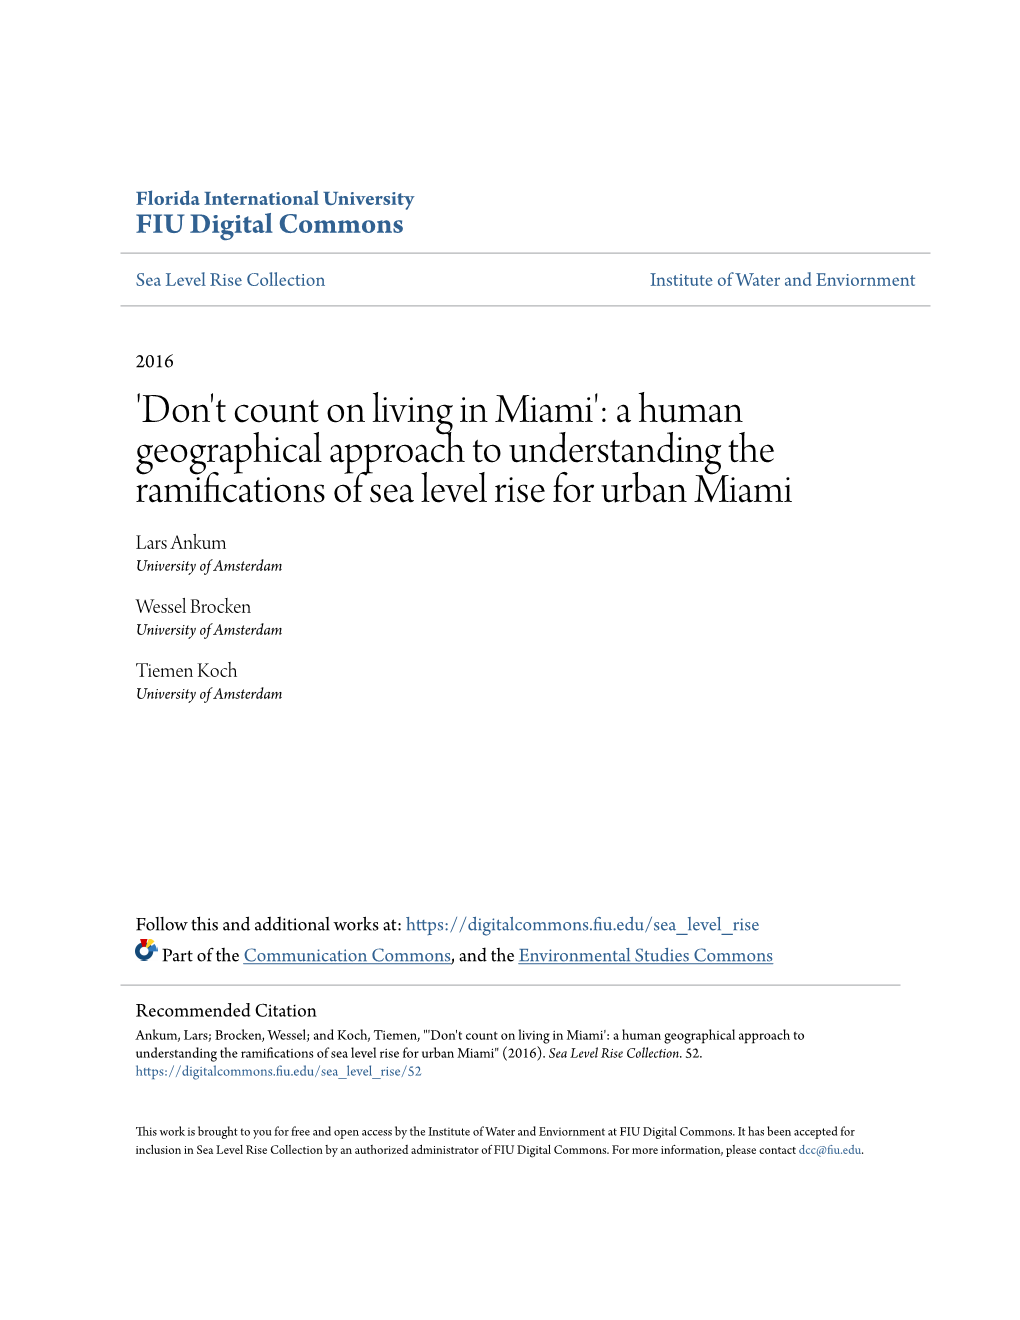 'Don't Count on Living in Miami': a Human Geographical Approach To